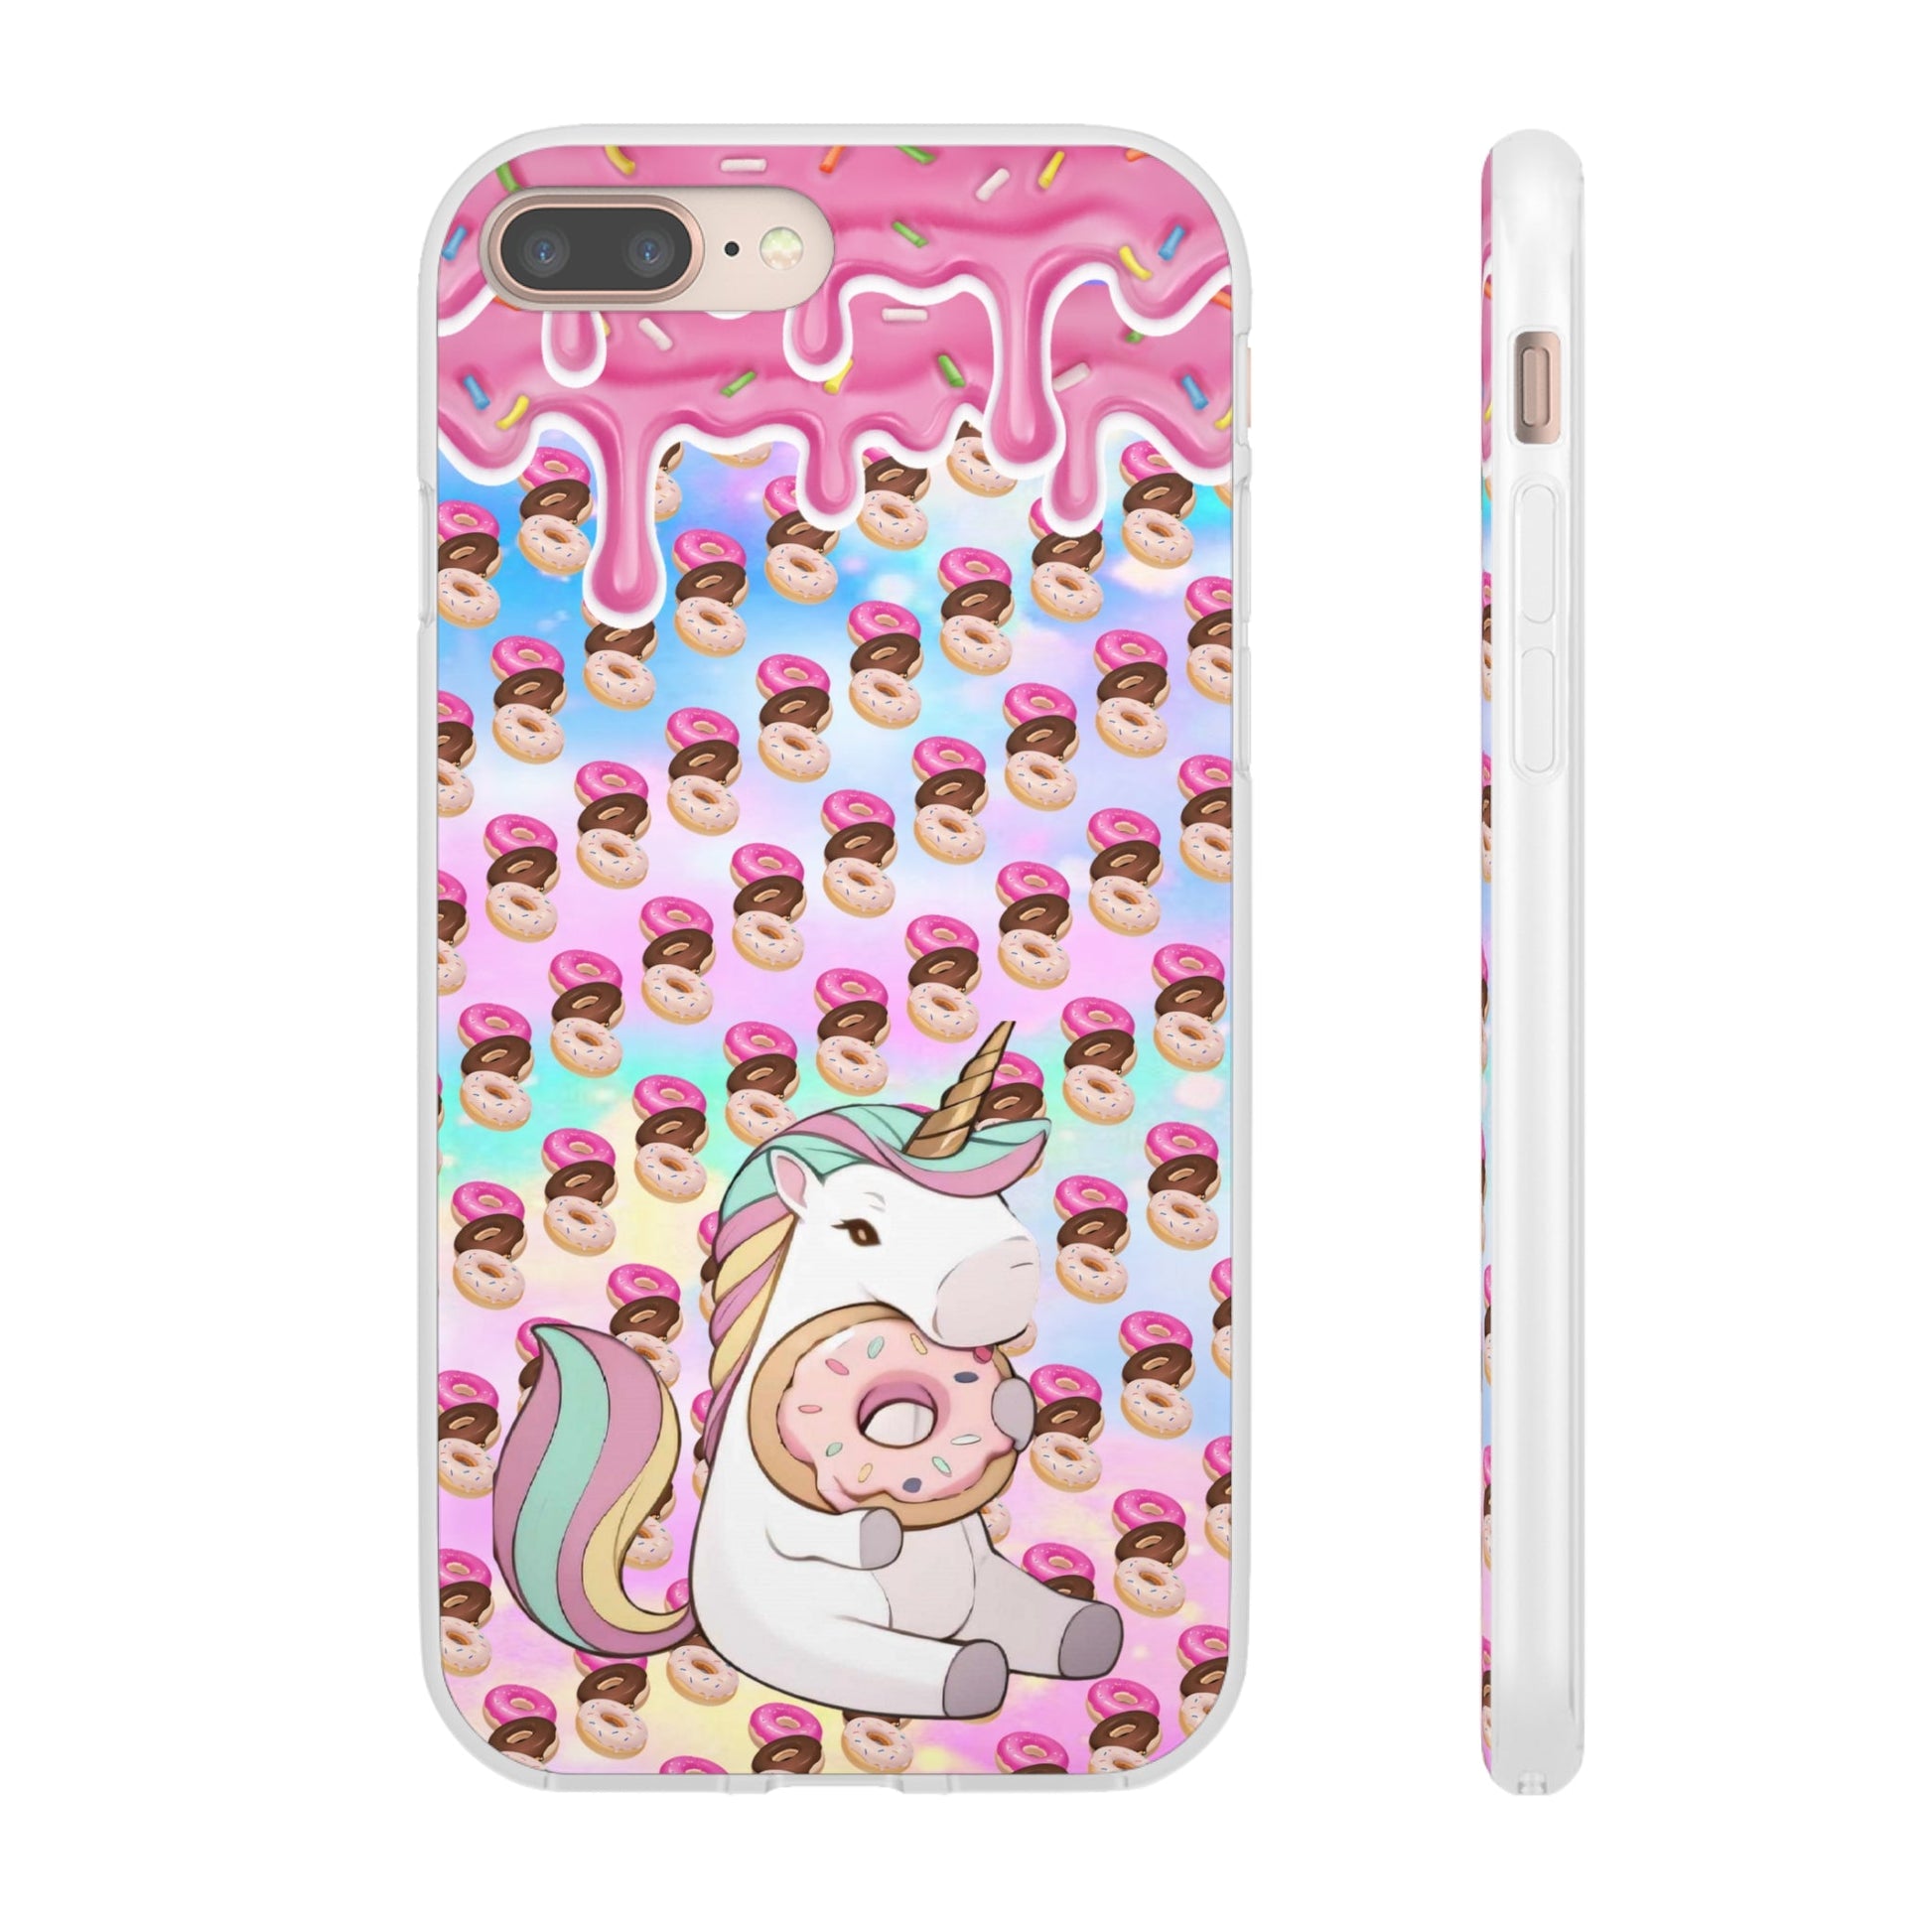 Stand out  with the  My little doughnut Flexi Cases  available at Hey Nugget. Grab yours today!